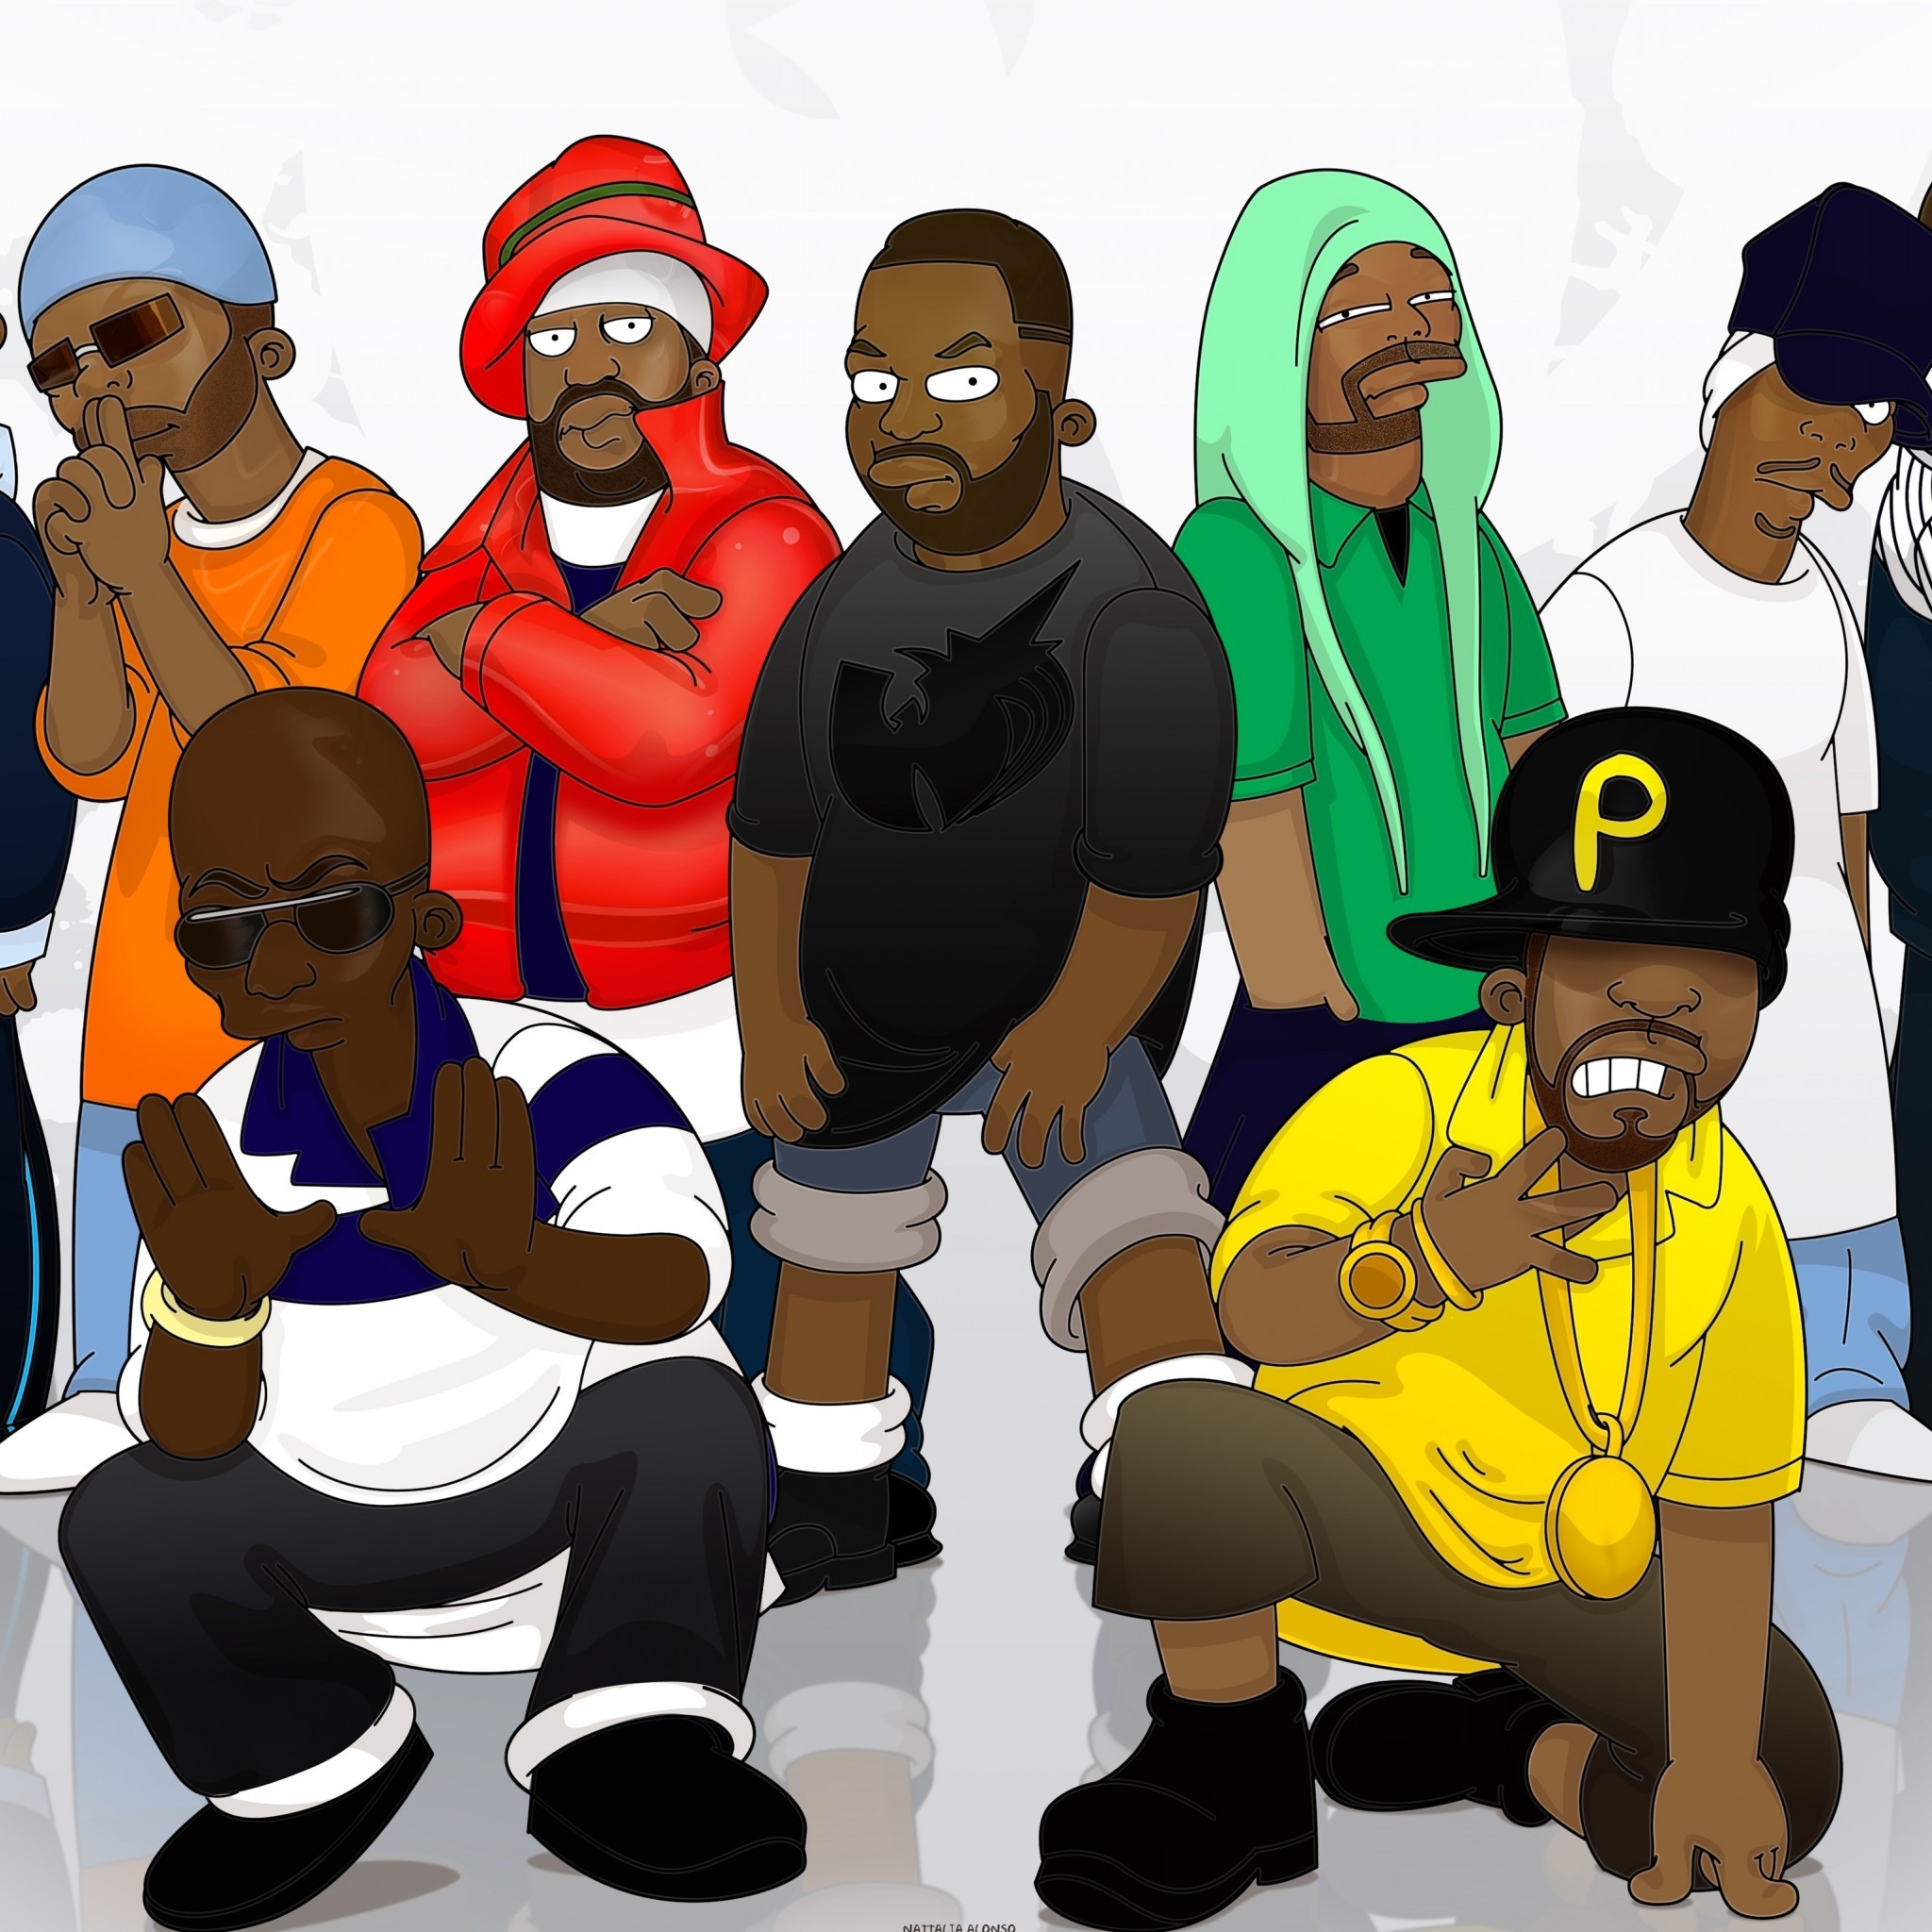 Wu-Tang Clan Group for 2048 x 2048 New iPad resolution